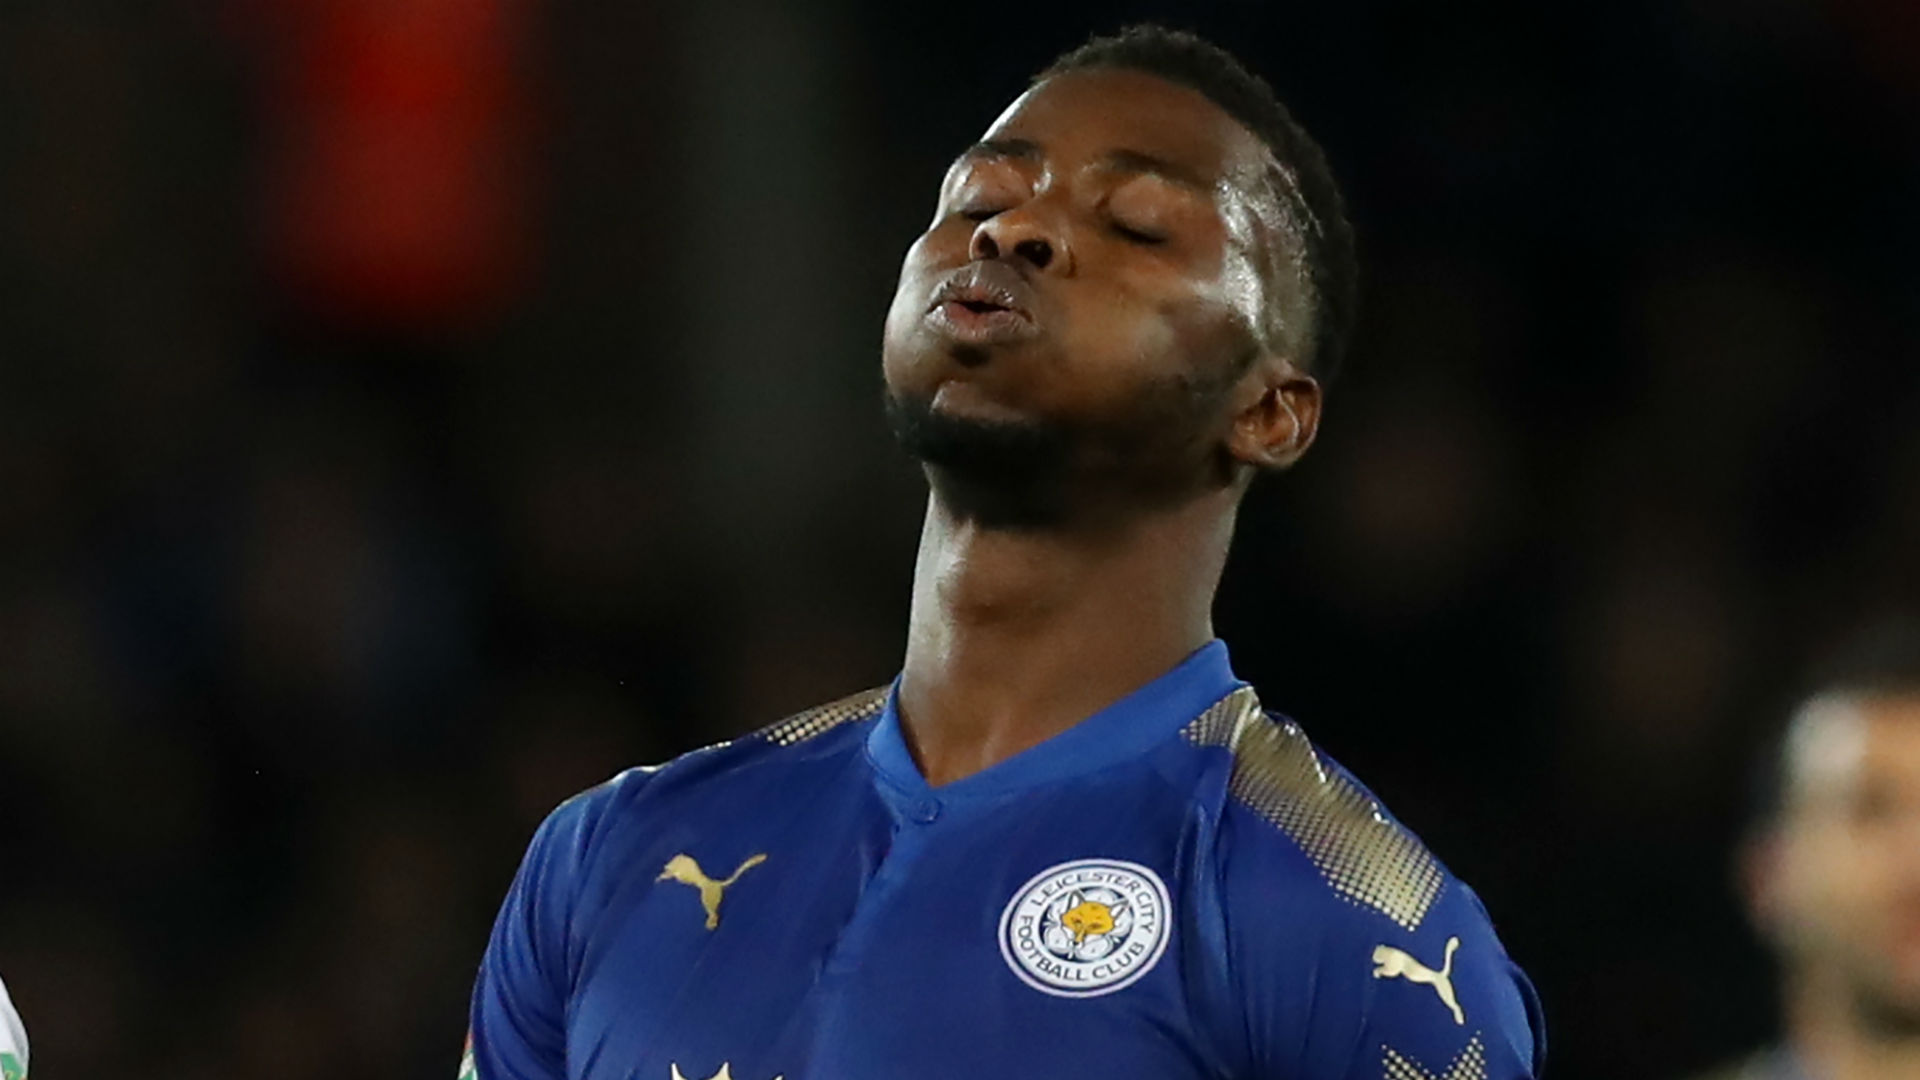 ‘He is not an outright striker’ - Leicester City’s use of Iheanacho questioned by Ugbade